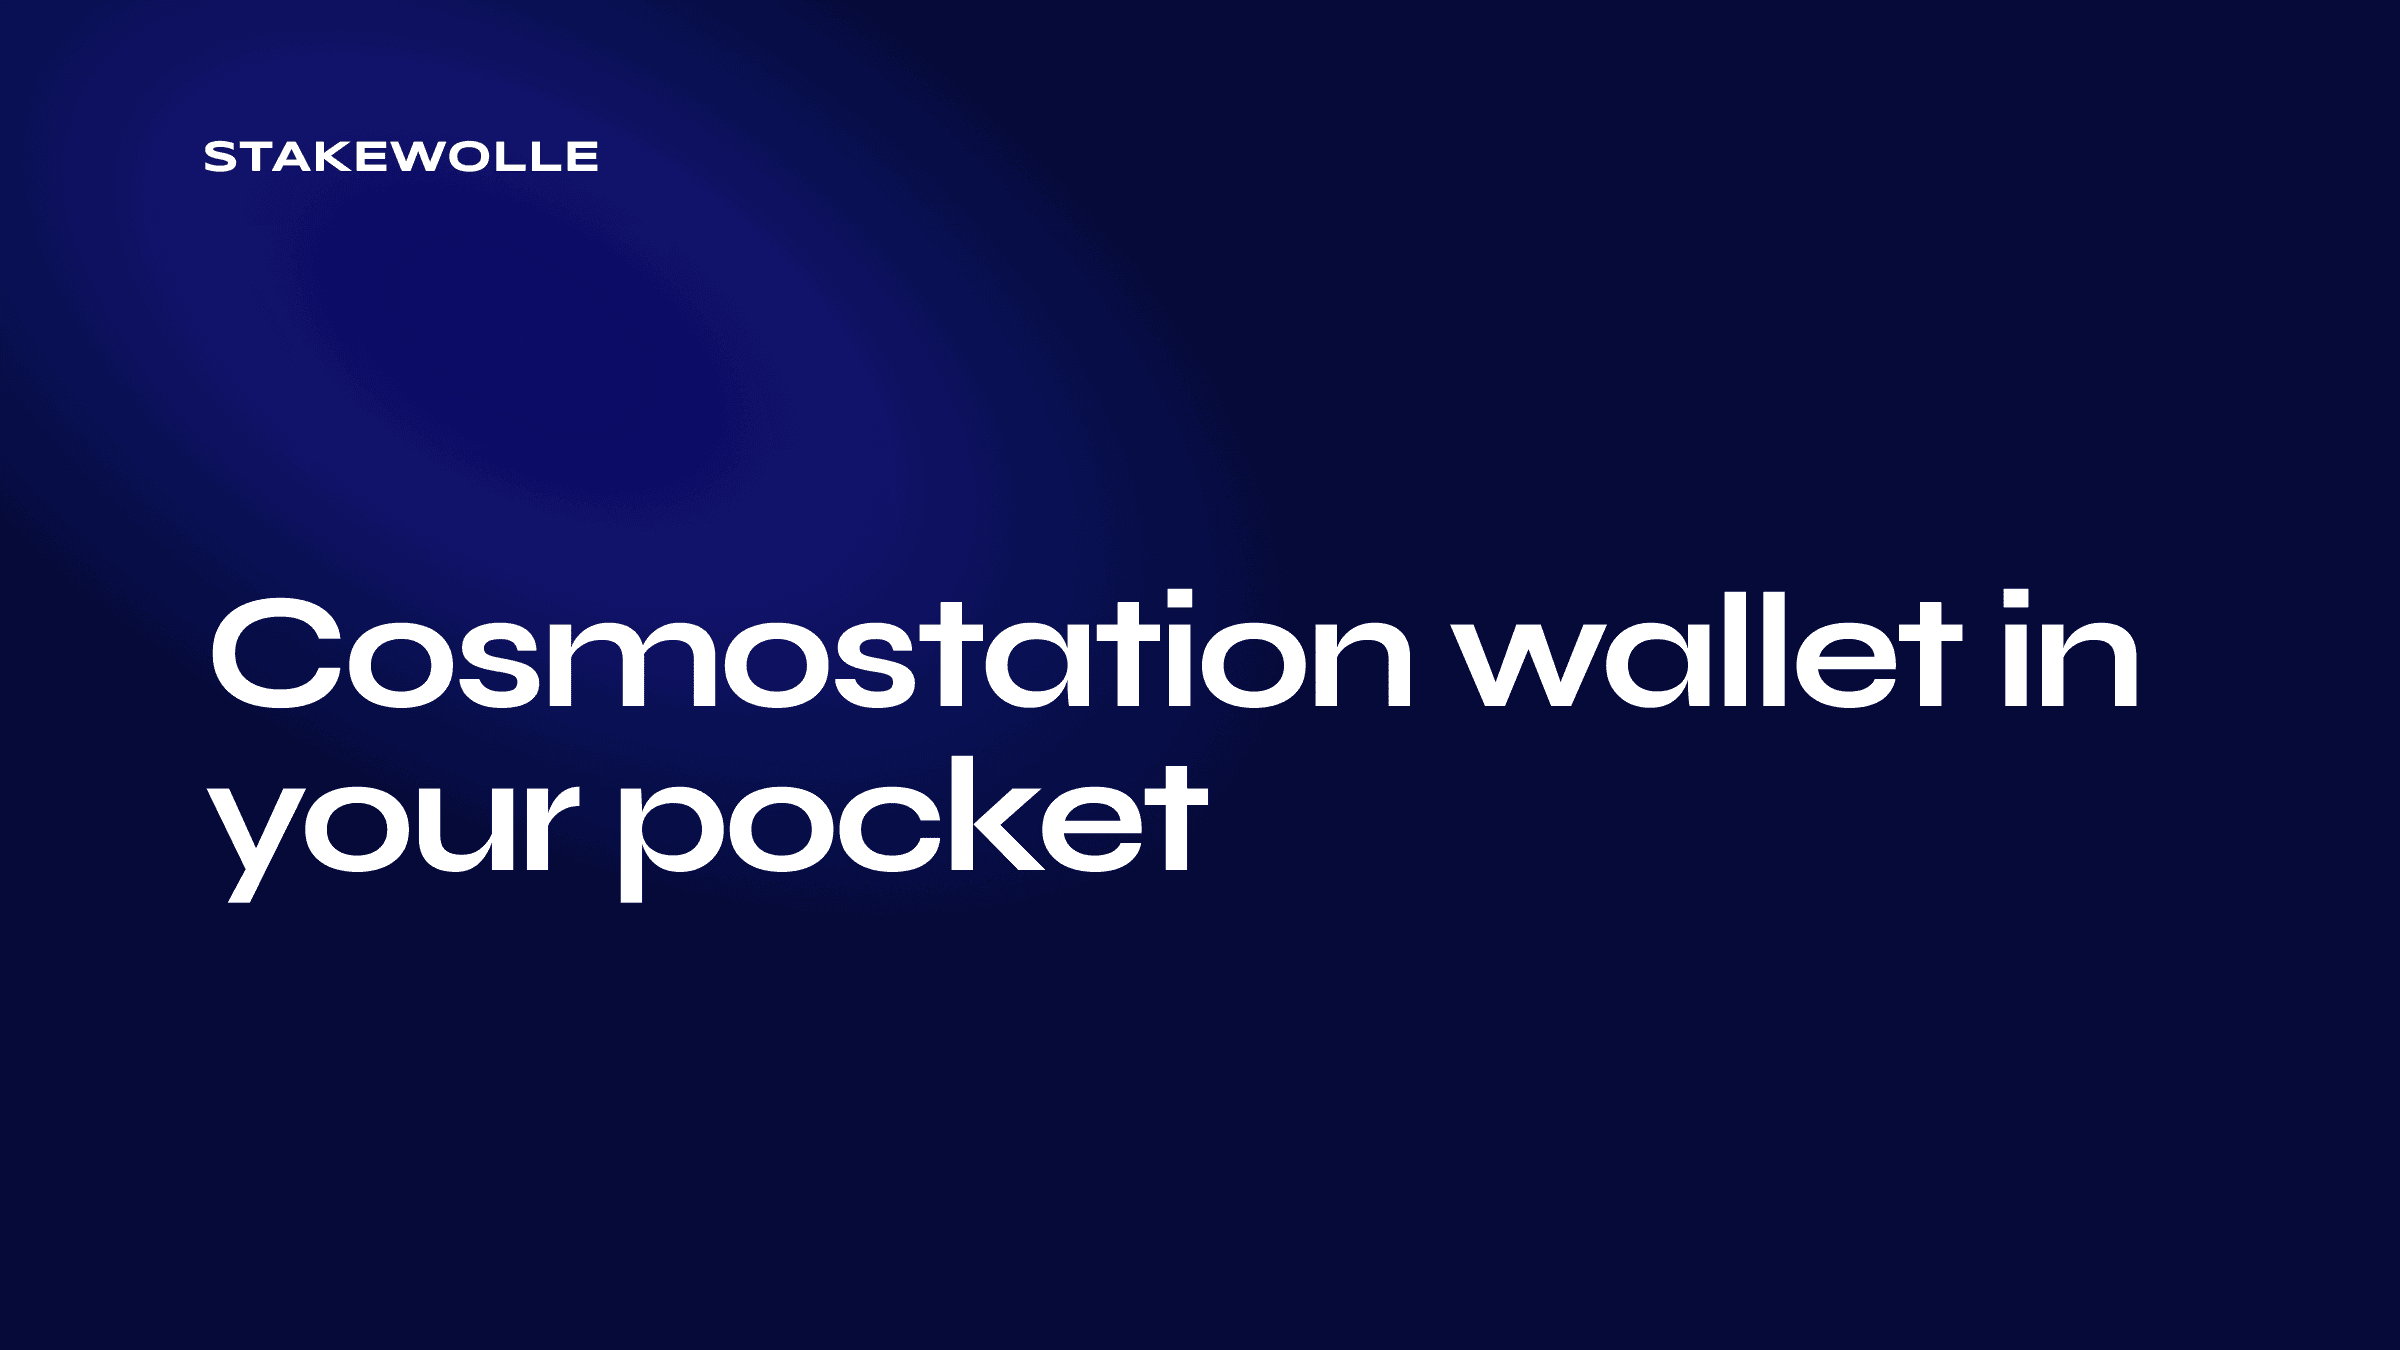 Cosmostation wallet in your pocket